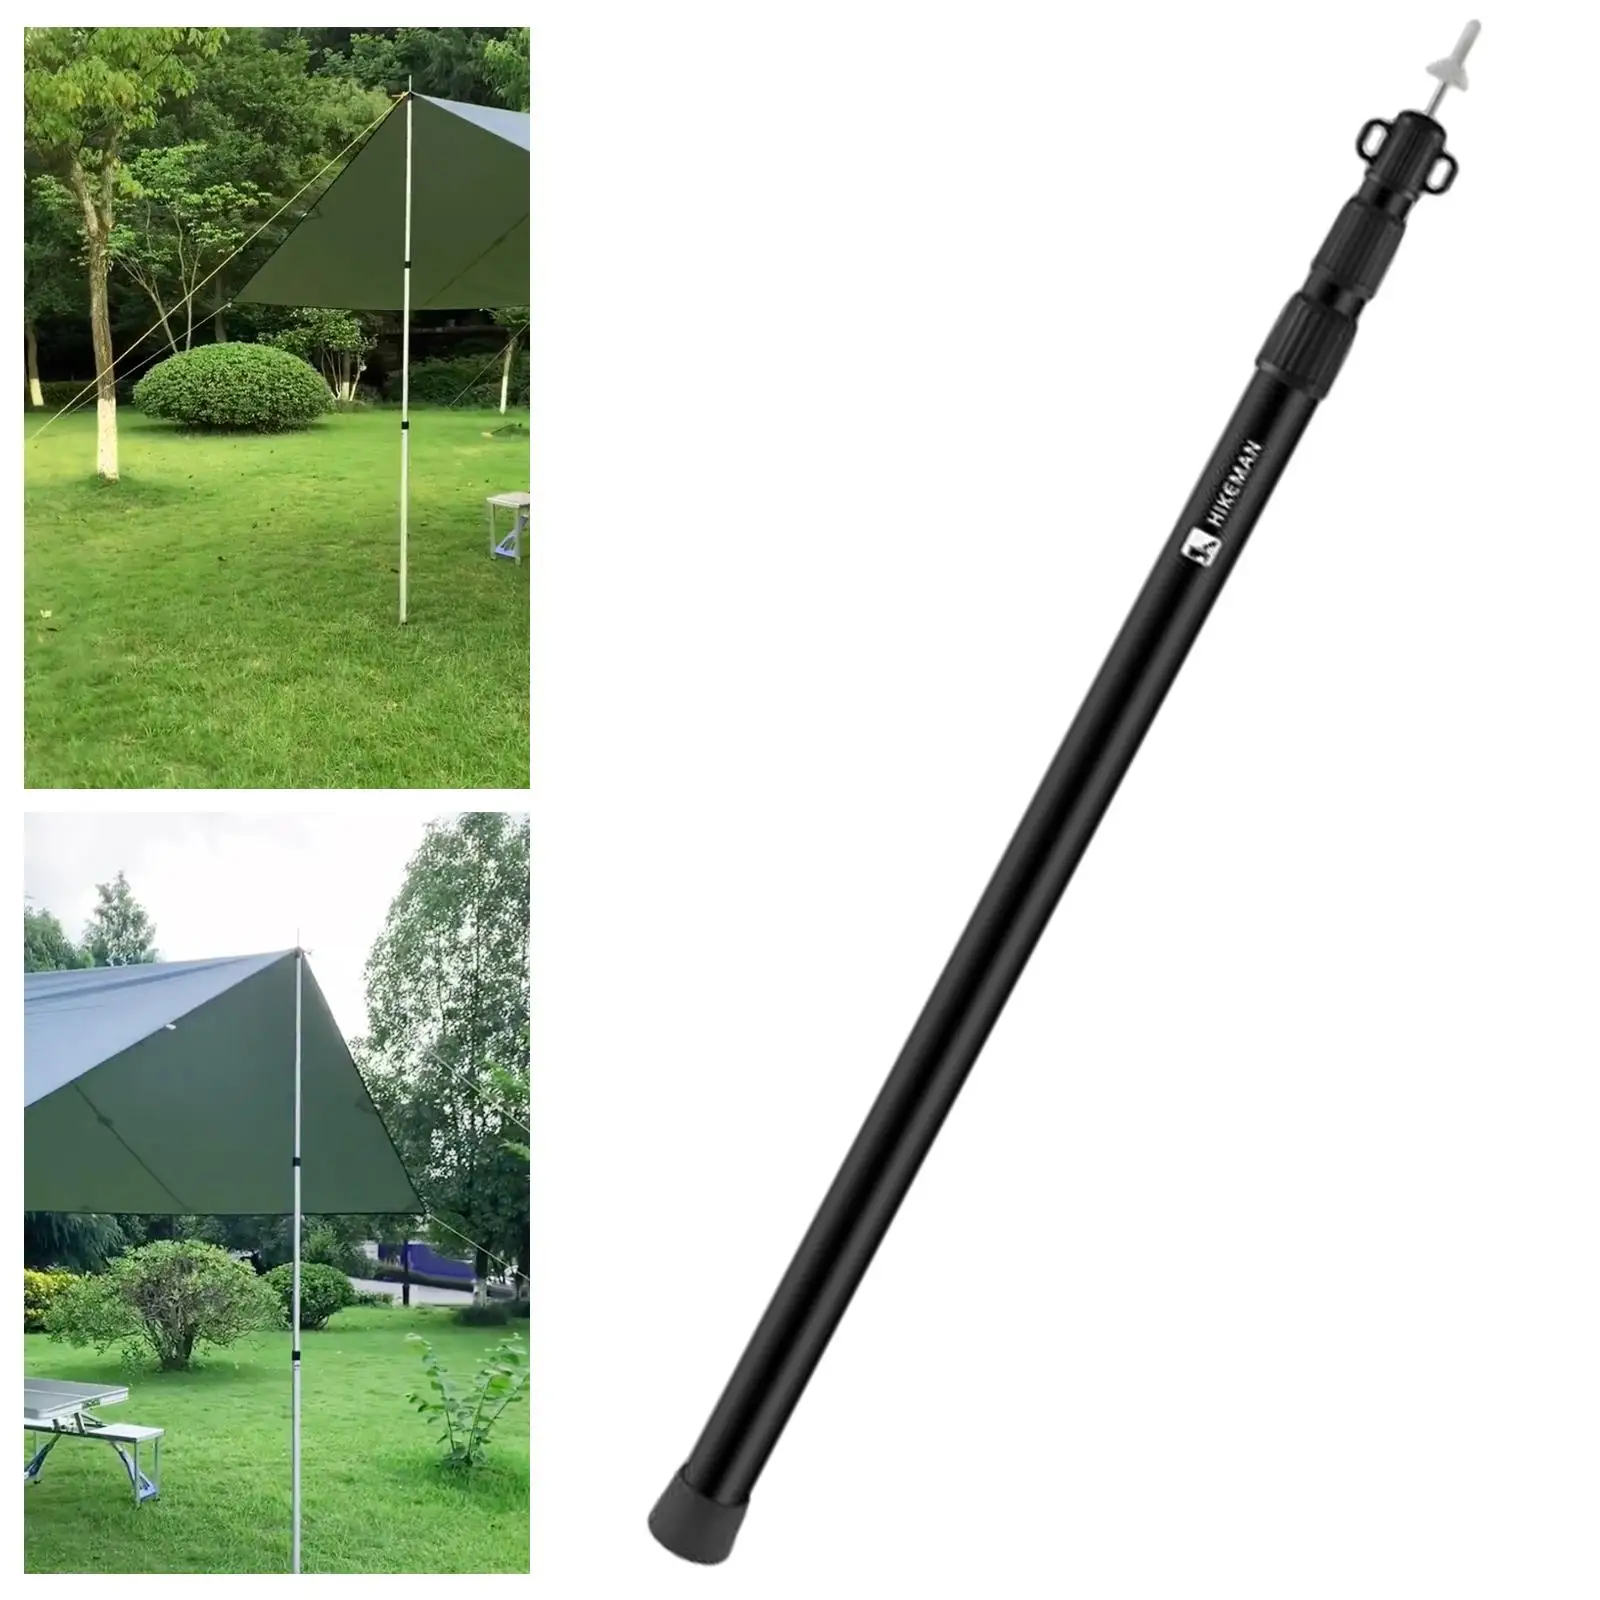 Telescopic Canvas Poles Tent Poles Awning Poles Outdoor Hiking